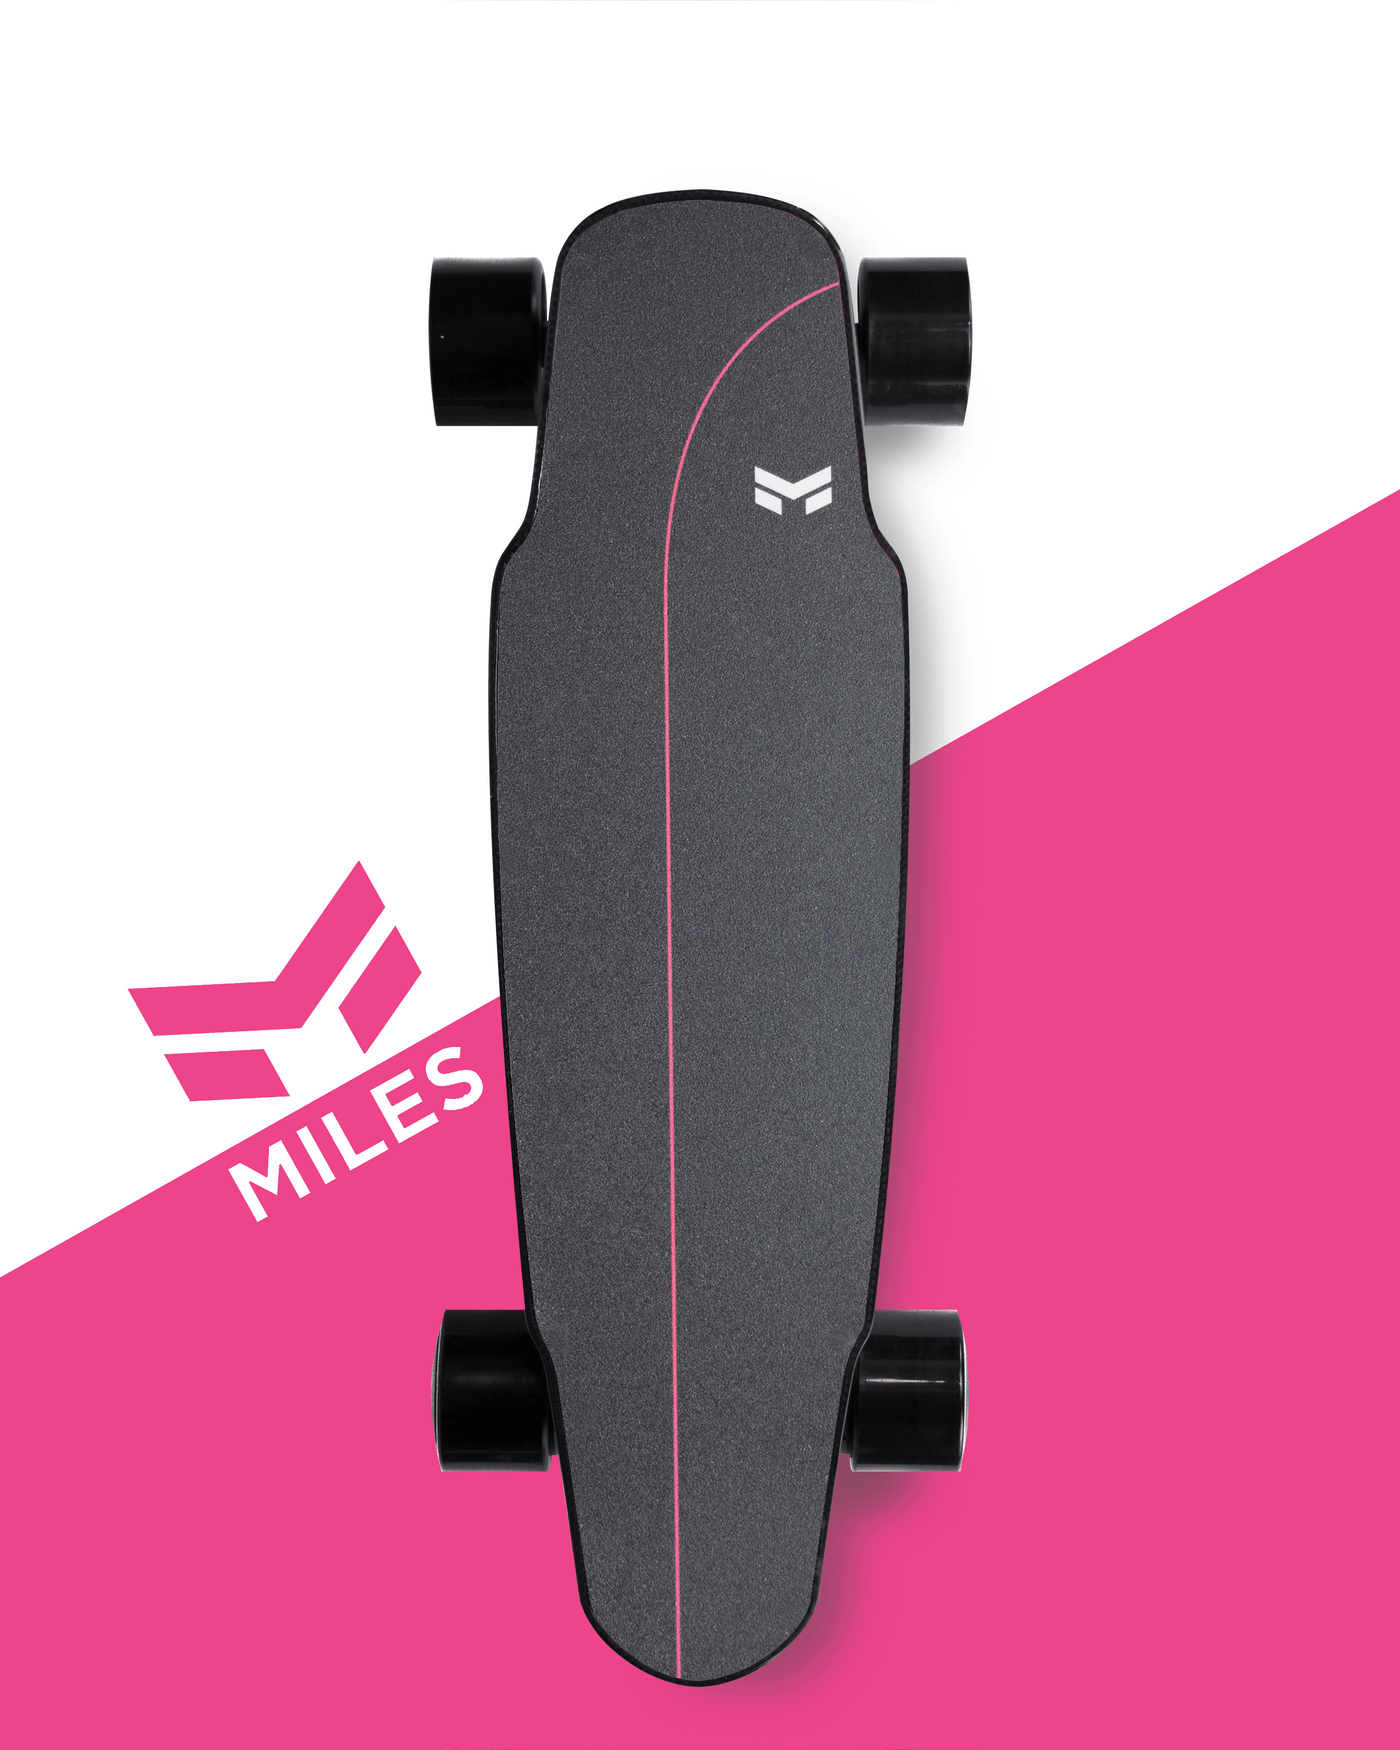 Miles Dual - Certified Refurbished (a few small dings)